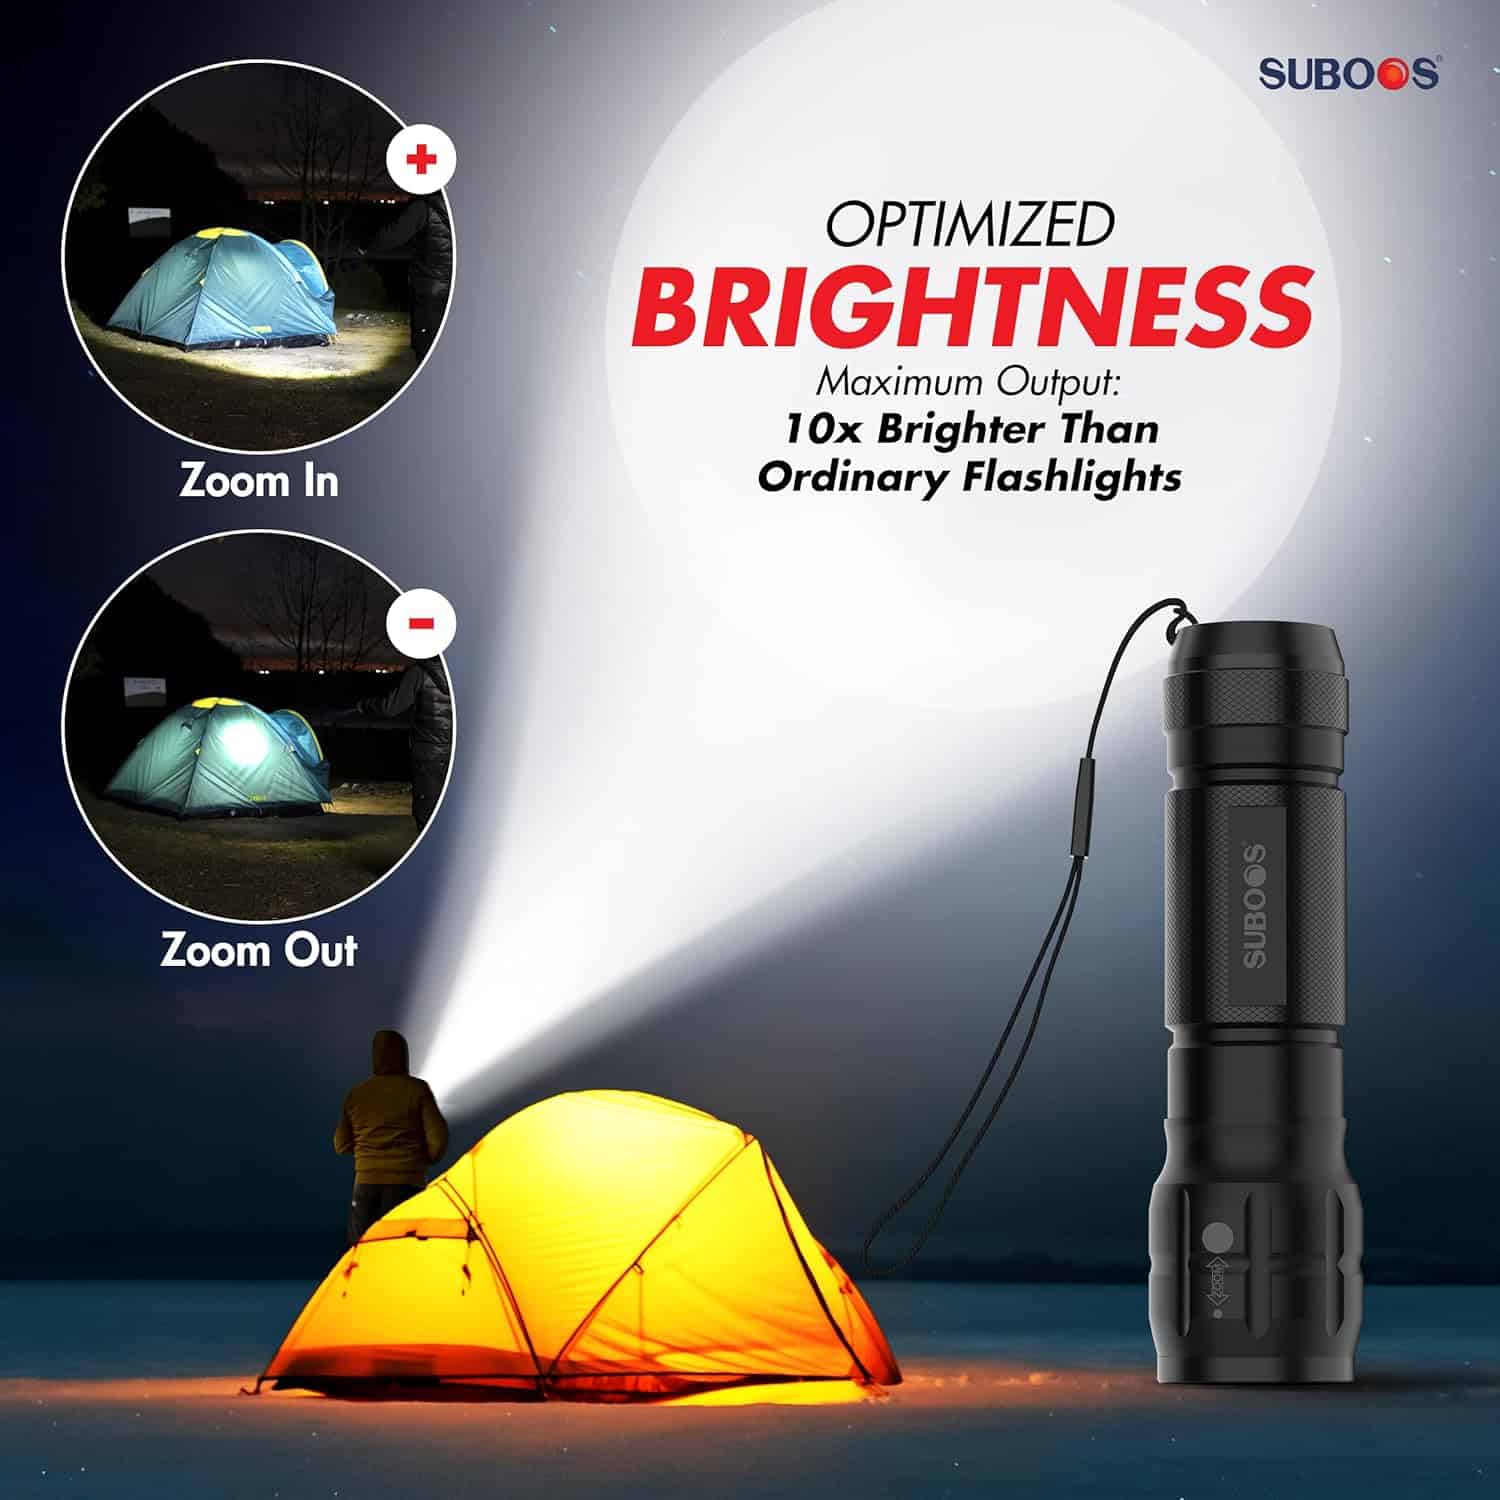 SUBOOS PocketPower LED Flashlight, High Lumens Flash Lights Battery Powered, Small Flashlights Powerful, Waterproof, Mini Flashlight for Home, Camping, Emergency, Batteries Included